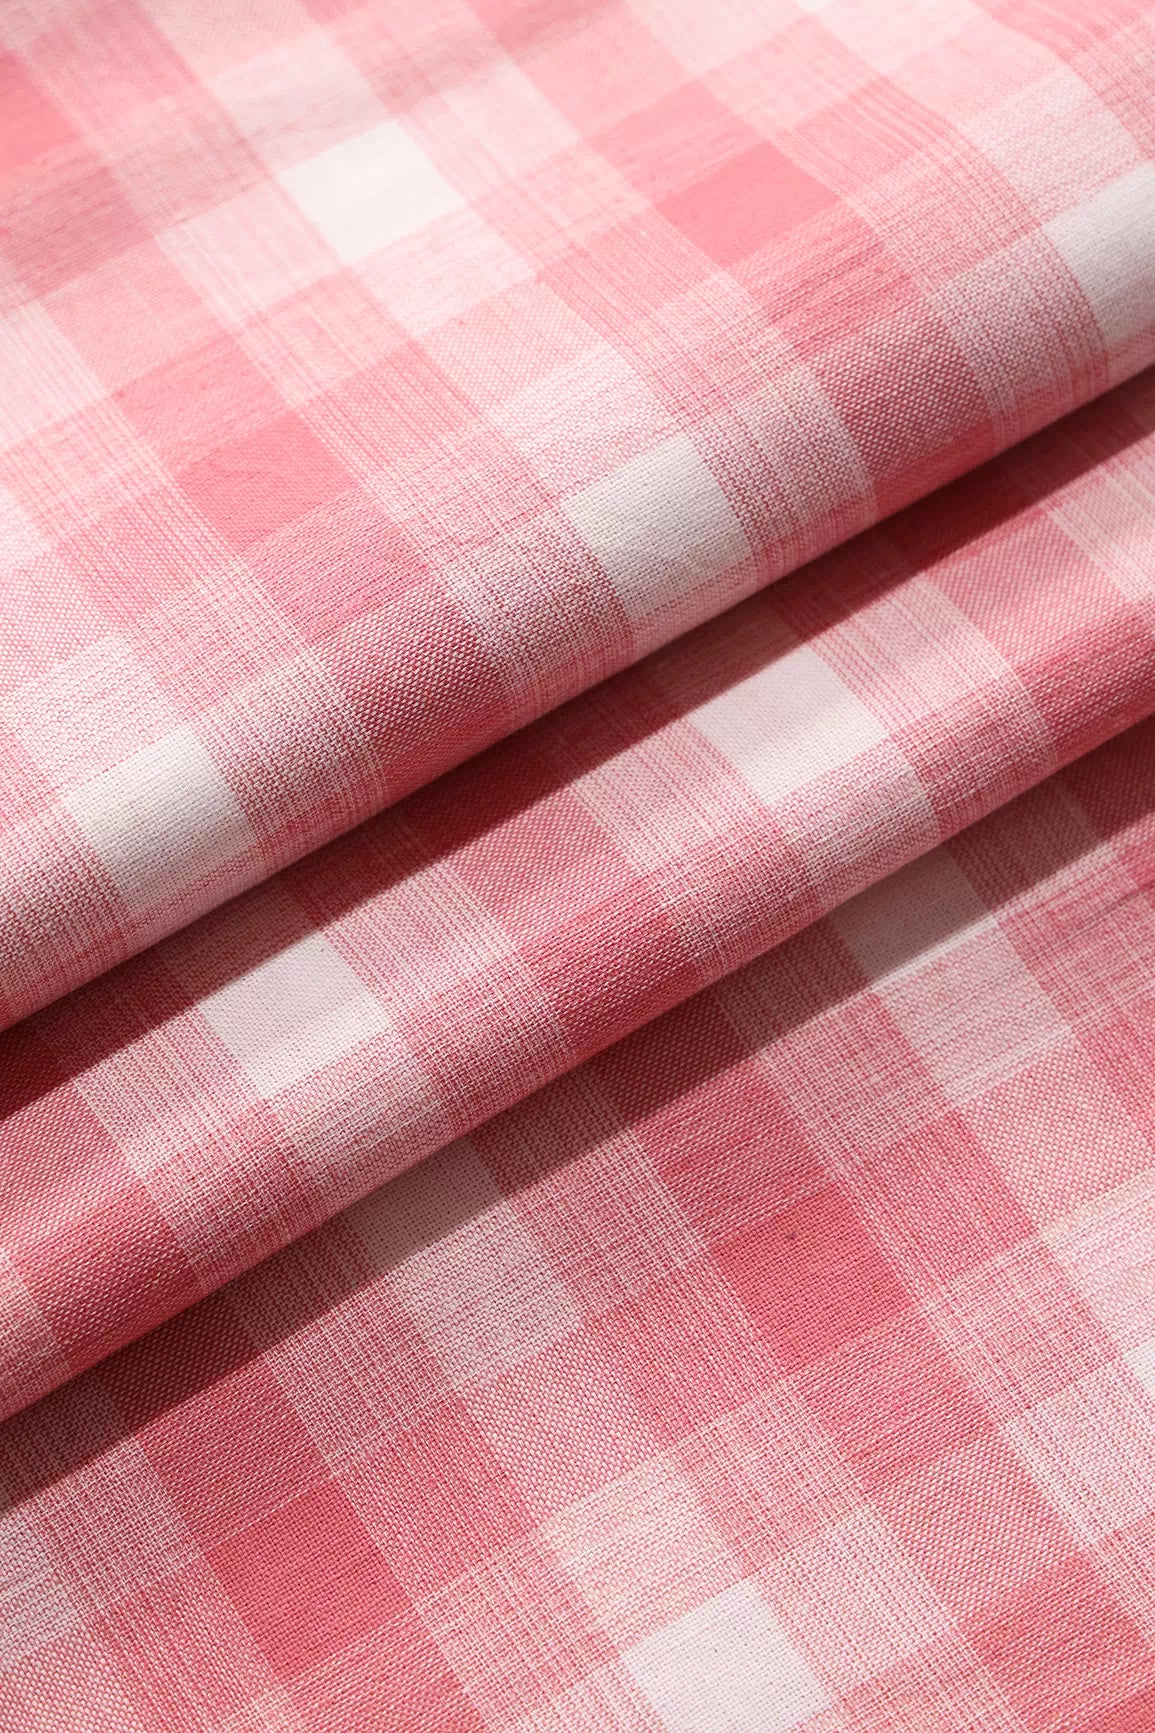 Rouge Pink And White Checks Pattern Handwoven Organic Cotton Fabric